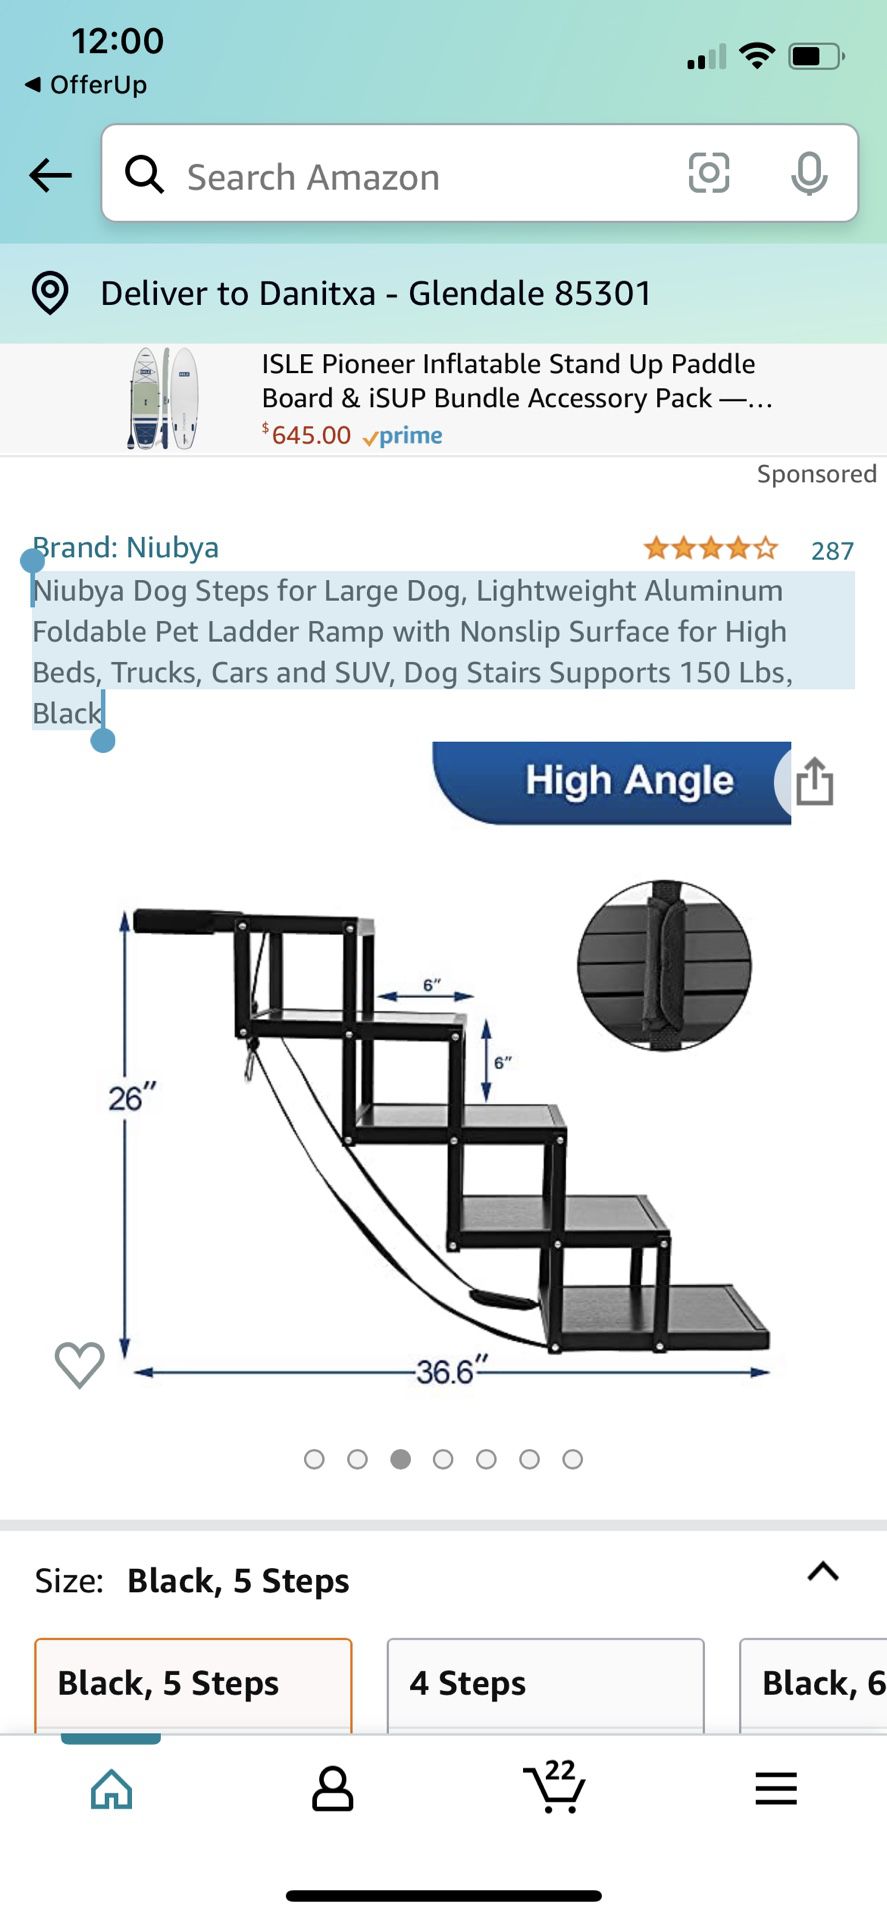 Niubya Dog Steps for Large Dog, Lightweight Aluminum Foldable Pet Ladder Ramp with Nonslip Surface for High Beds, Trucks, Cars and SUV, Dog Stairs Sup